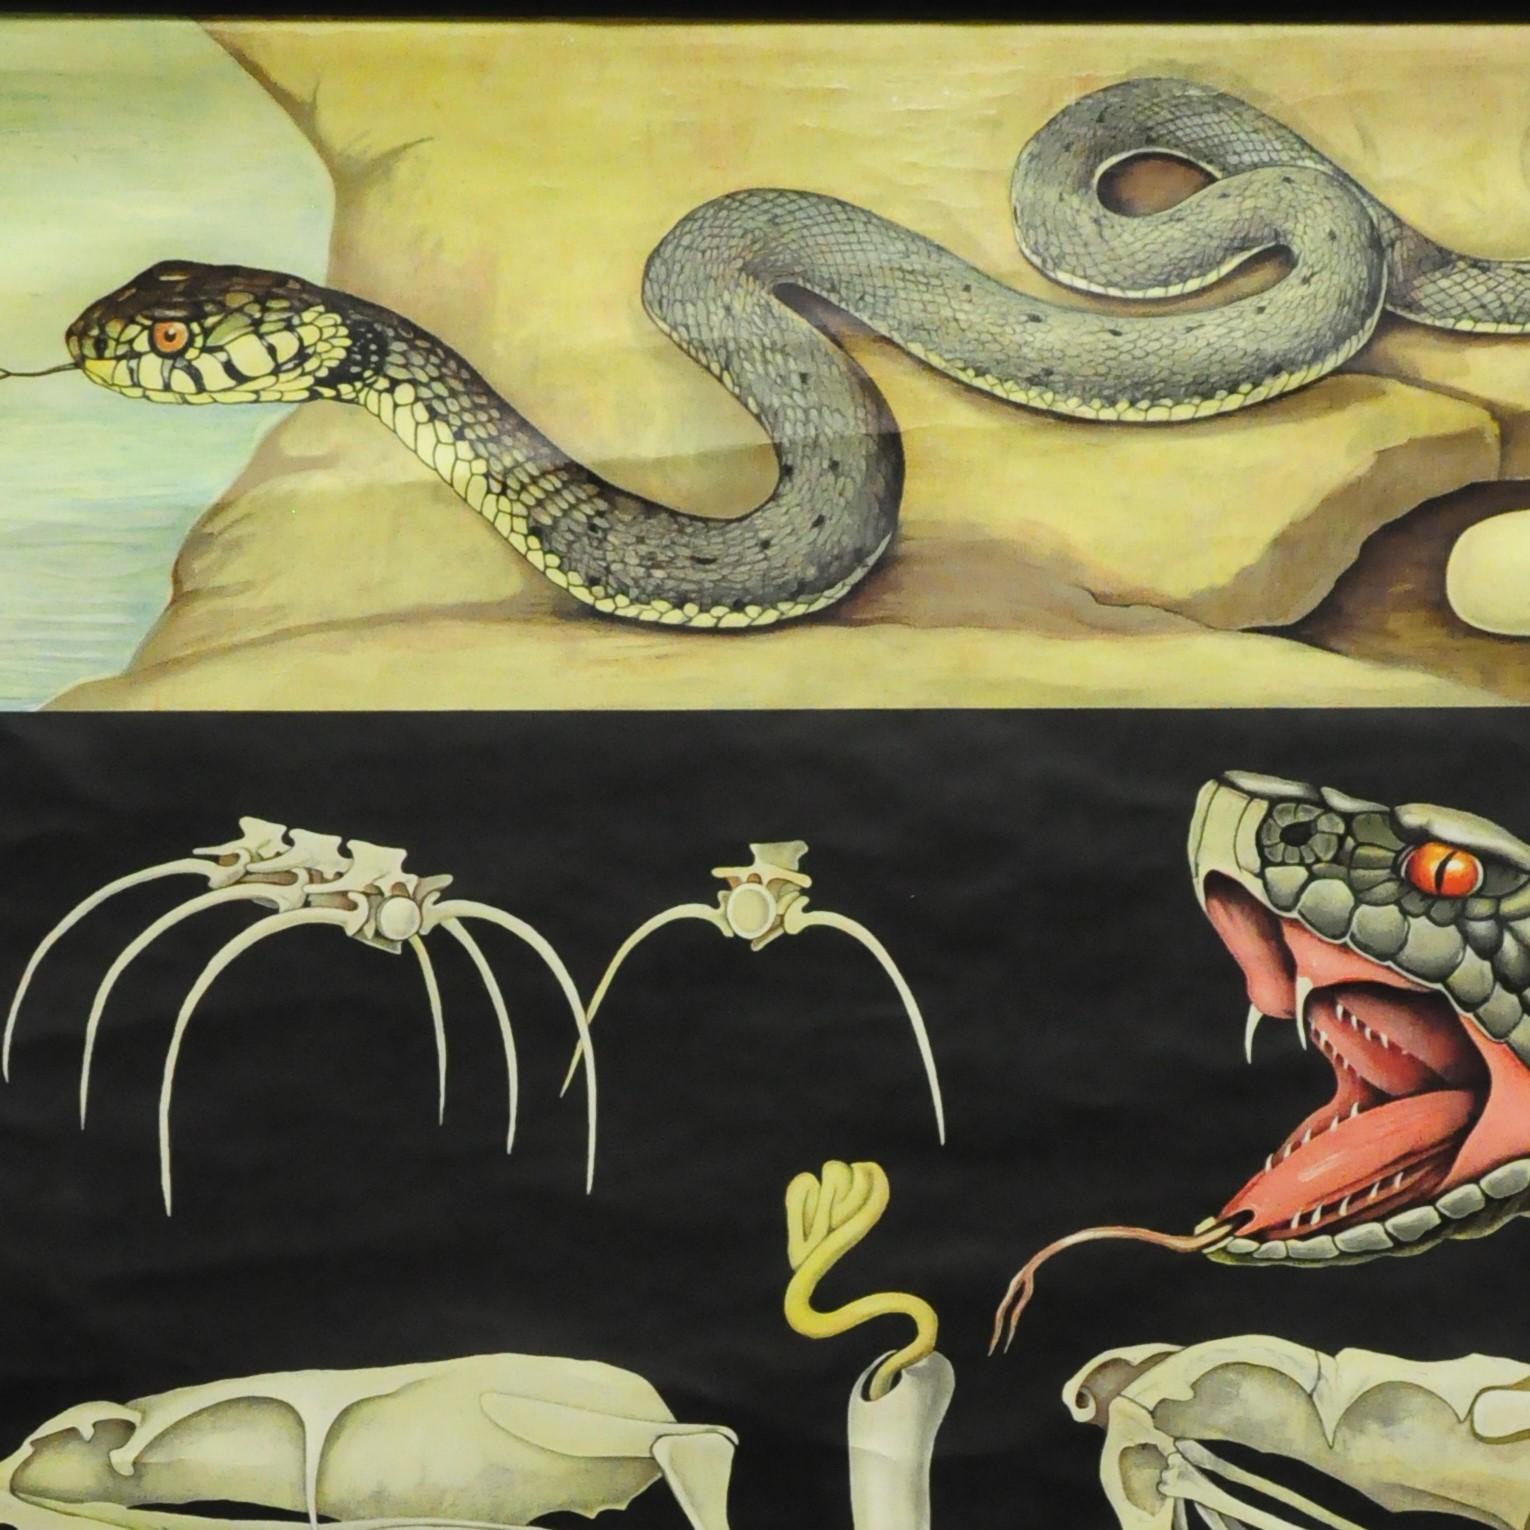 A cottagecore pull-down Jung- Koch- Quentellwall chart showing grass snake and adder. Used as teaching material in German schools. Colorful print on paper reinforced with canvas. Published by Hagemann Lehrmittelverlag, Duesseldorf. You can see the